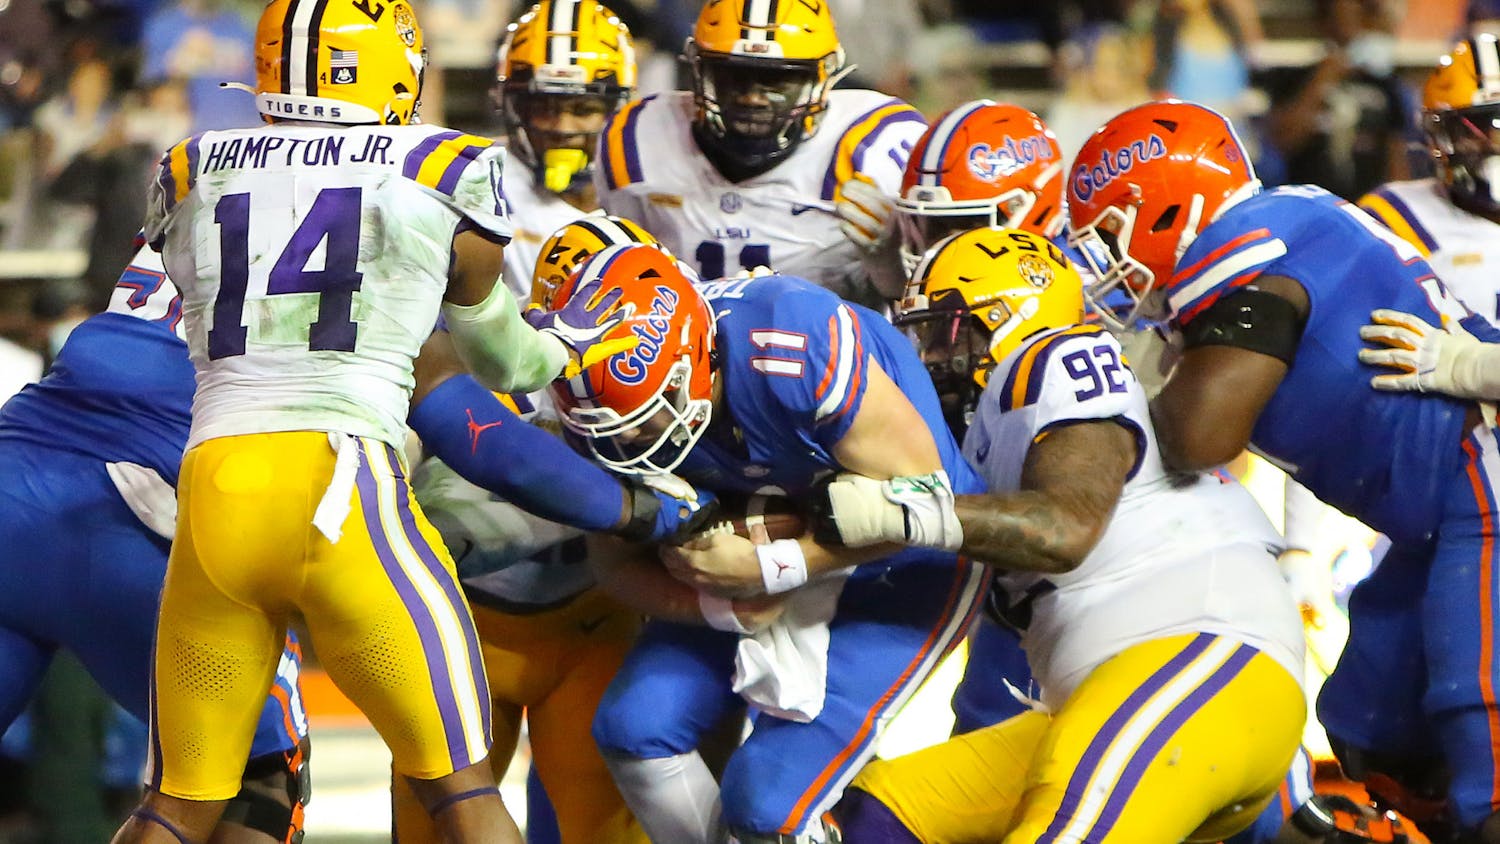 Gators quarterbacks Kyle Trask (11) runs the ball in for the Gators' first touchdown against LSU Saturday night. [Brad McClenny/The Gainesville Sun]   